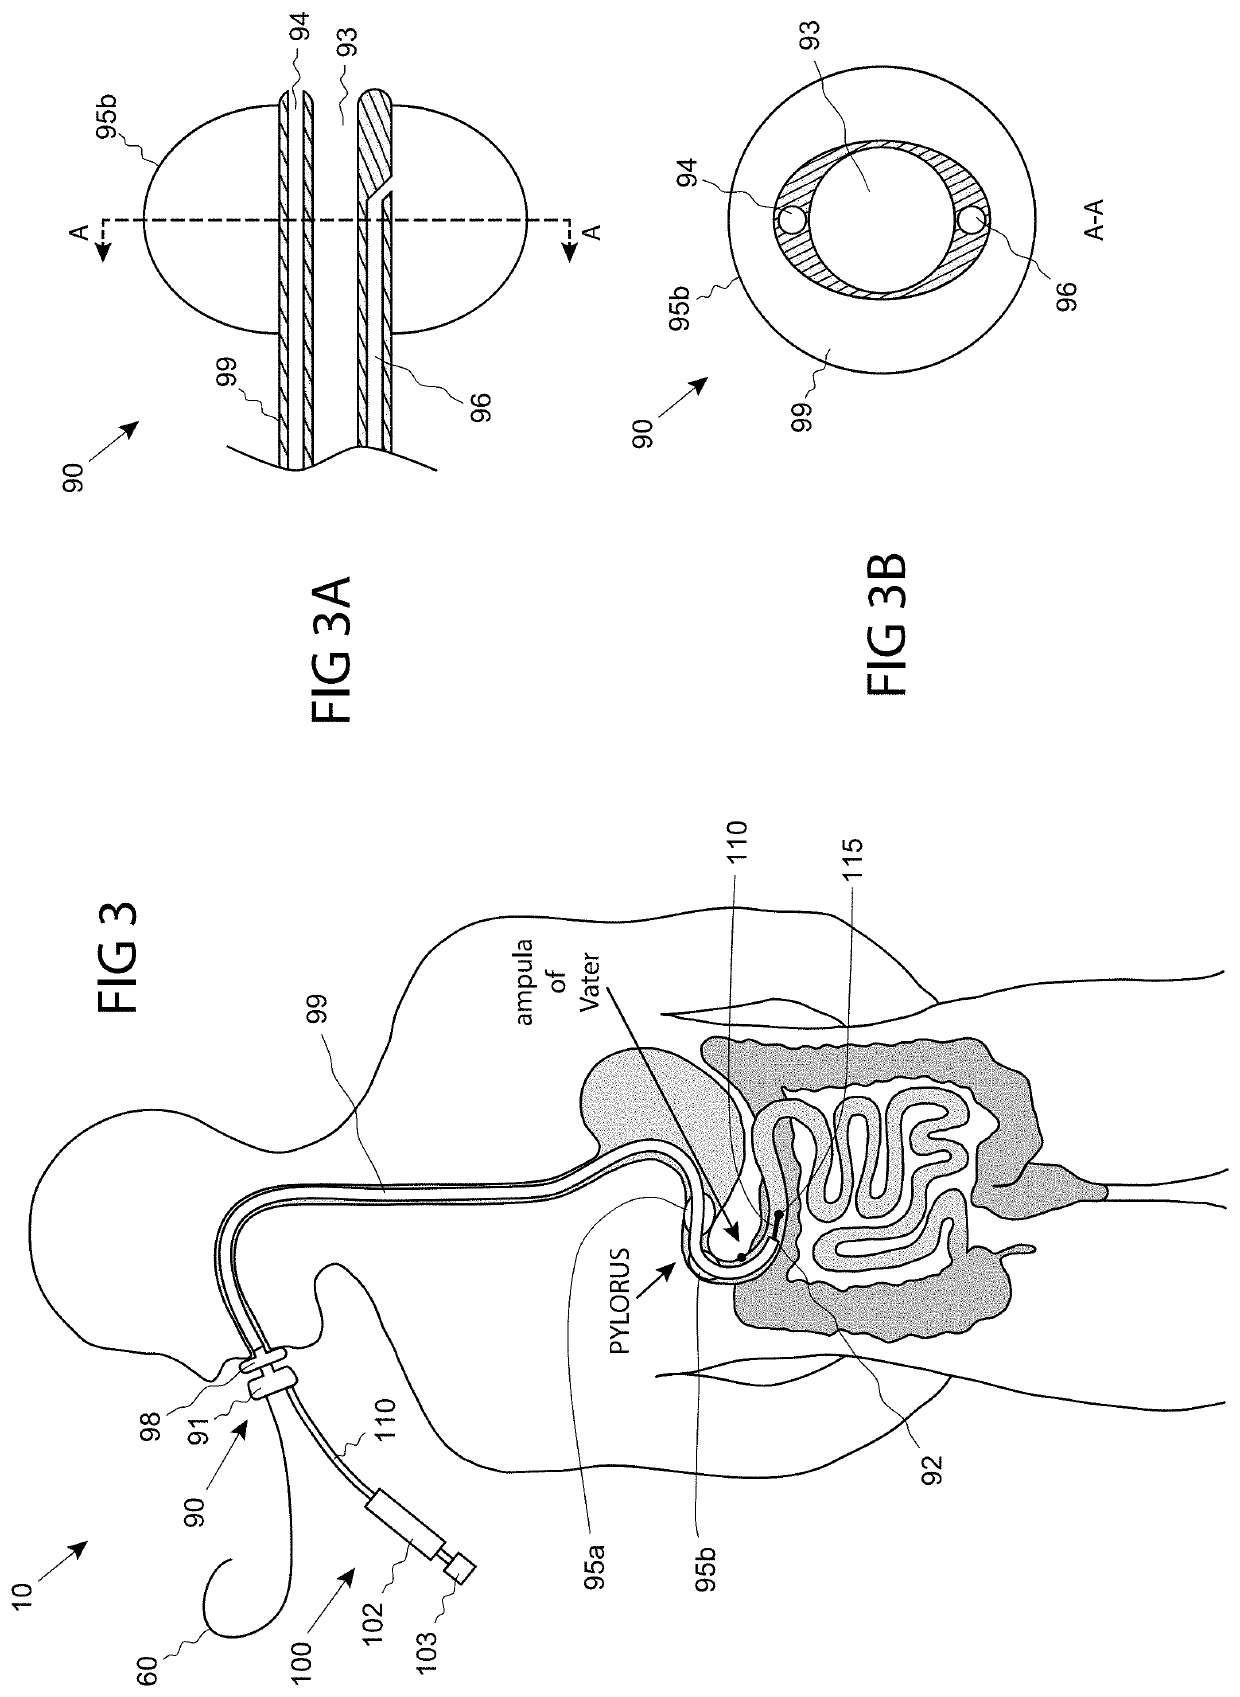 Systems, devices, and methods for performing medical procedures in the intestine